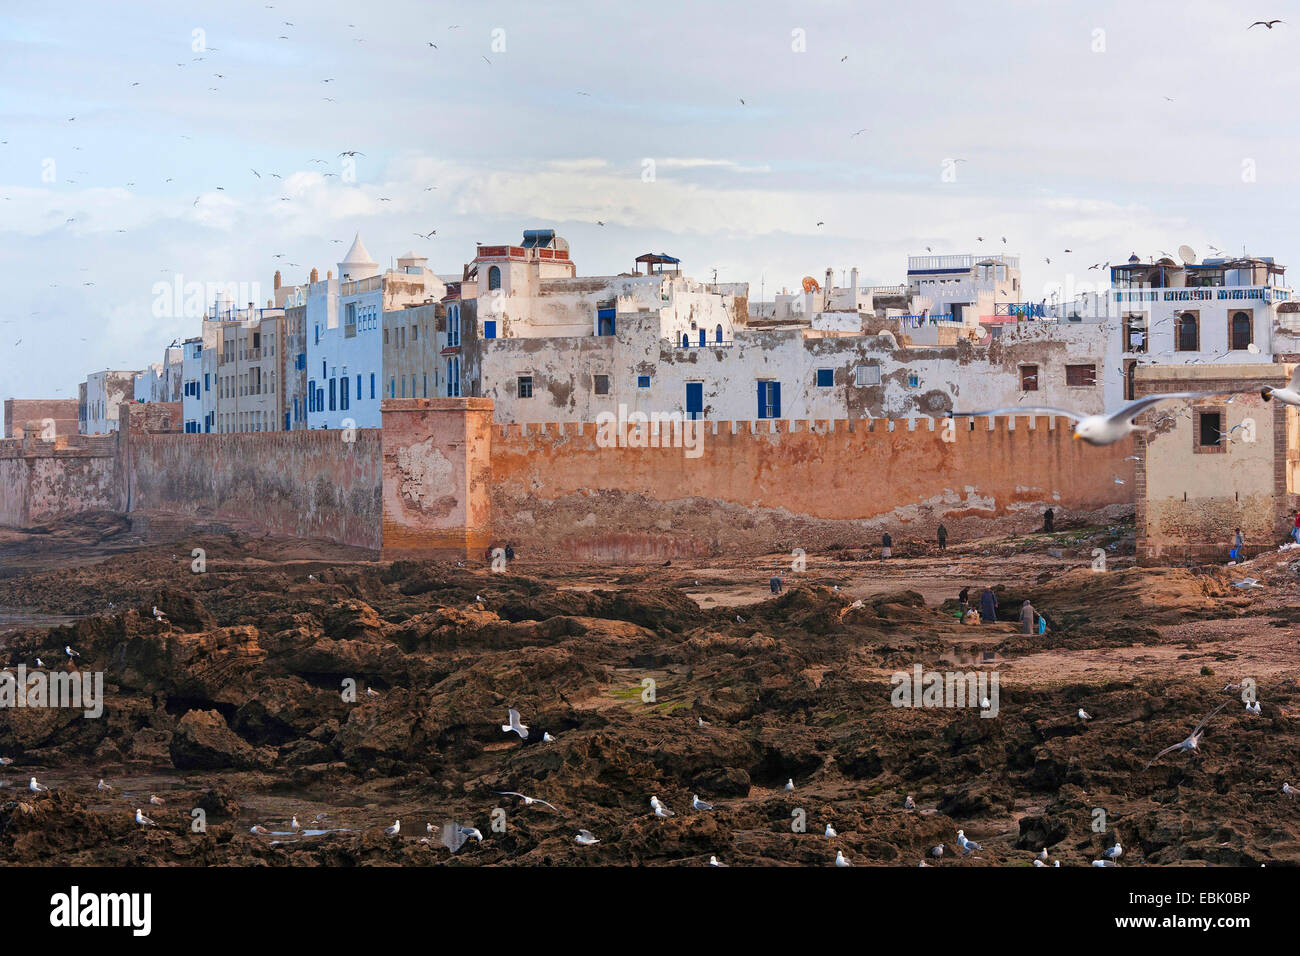 view on town with town wall, Morocco, Essaouira Stock Photo